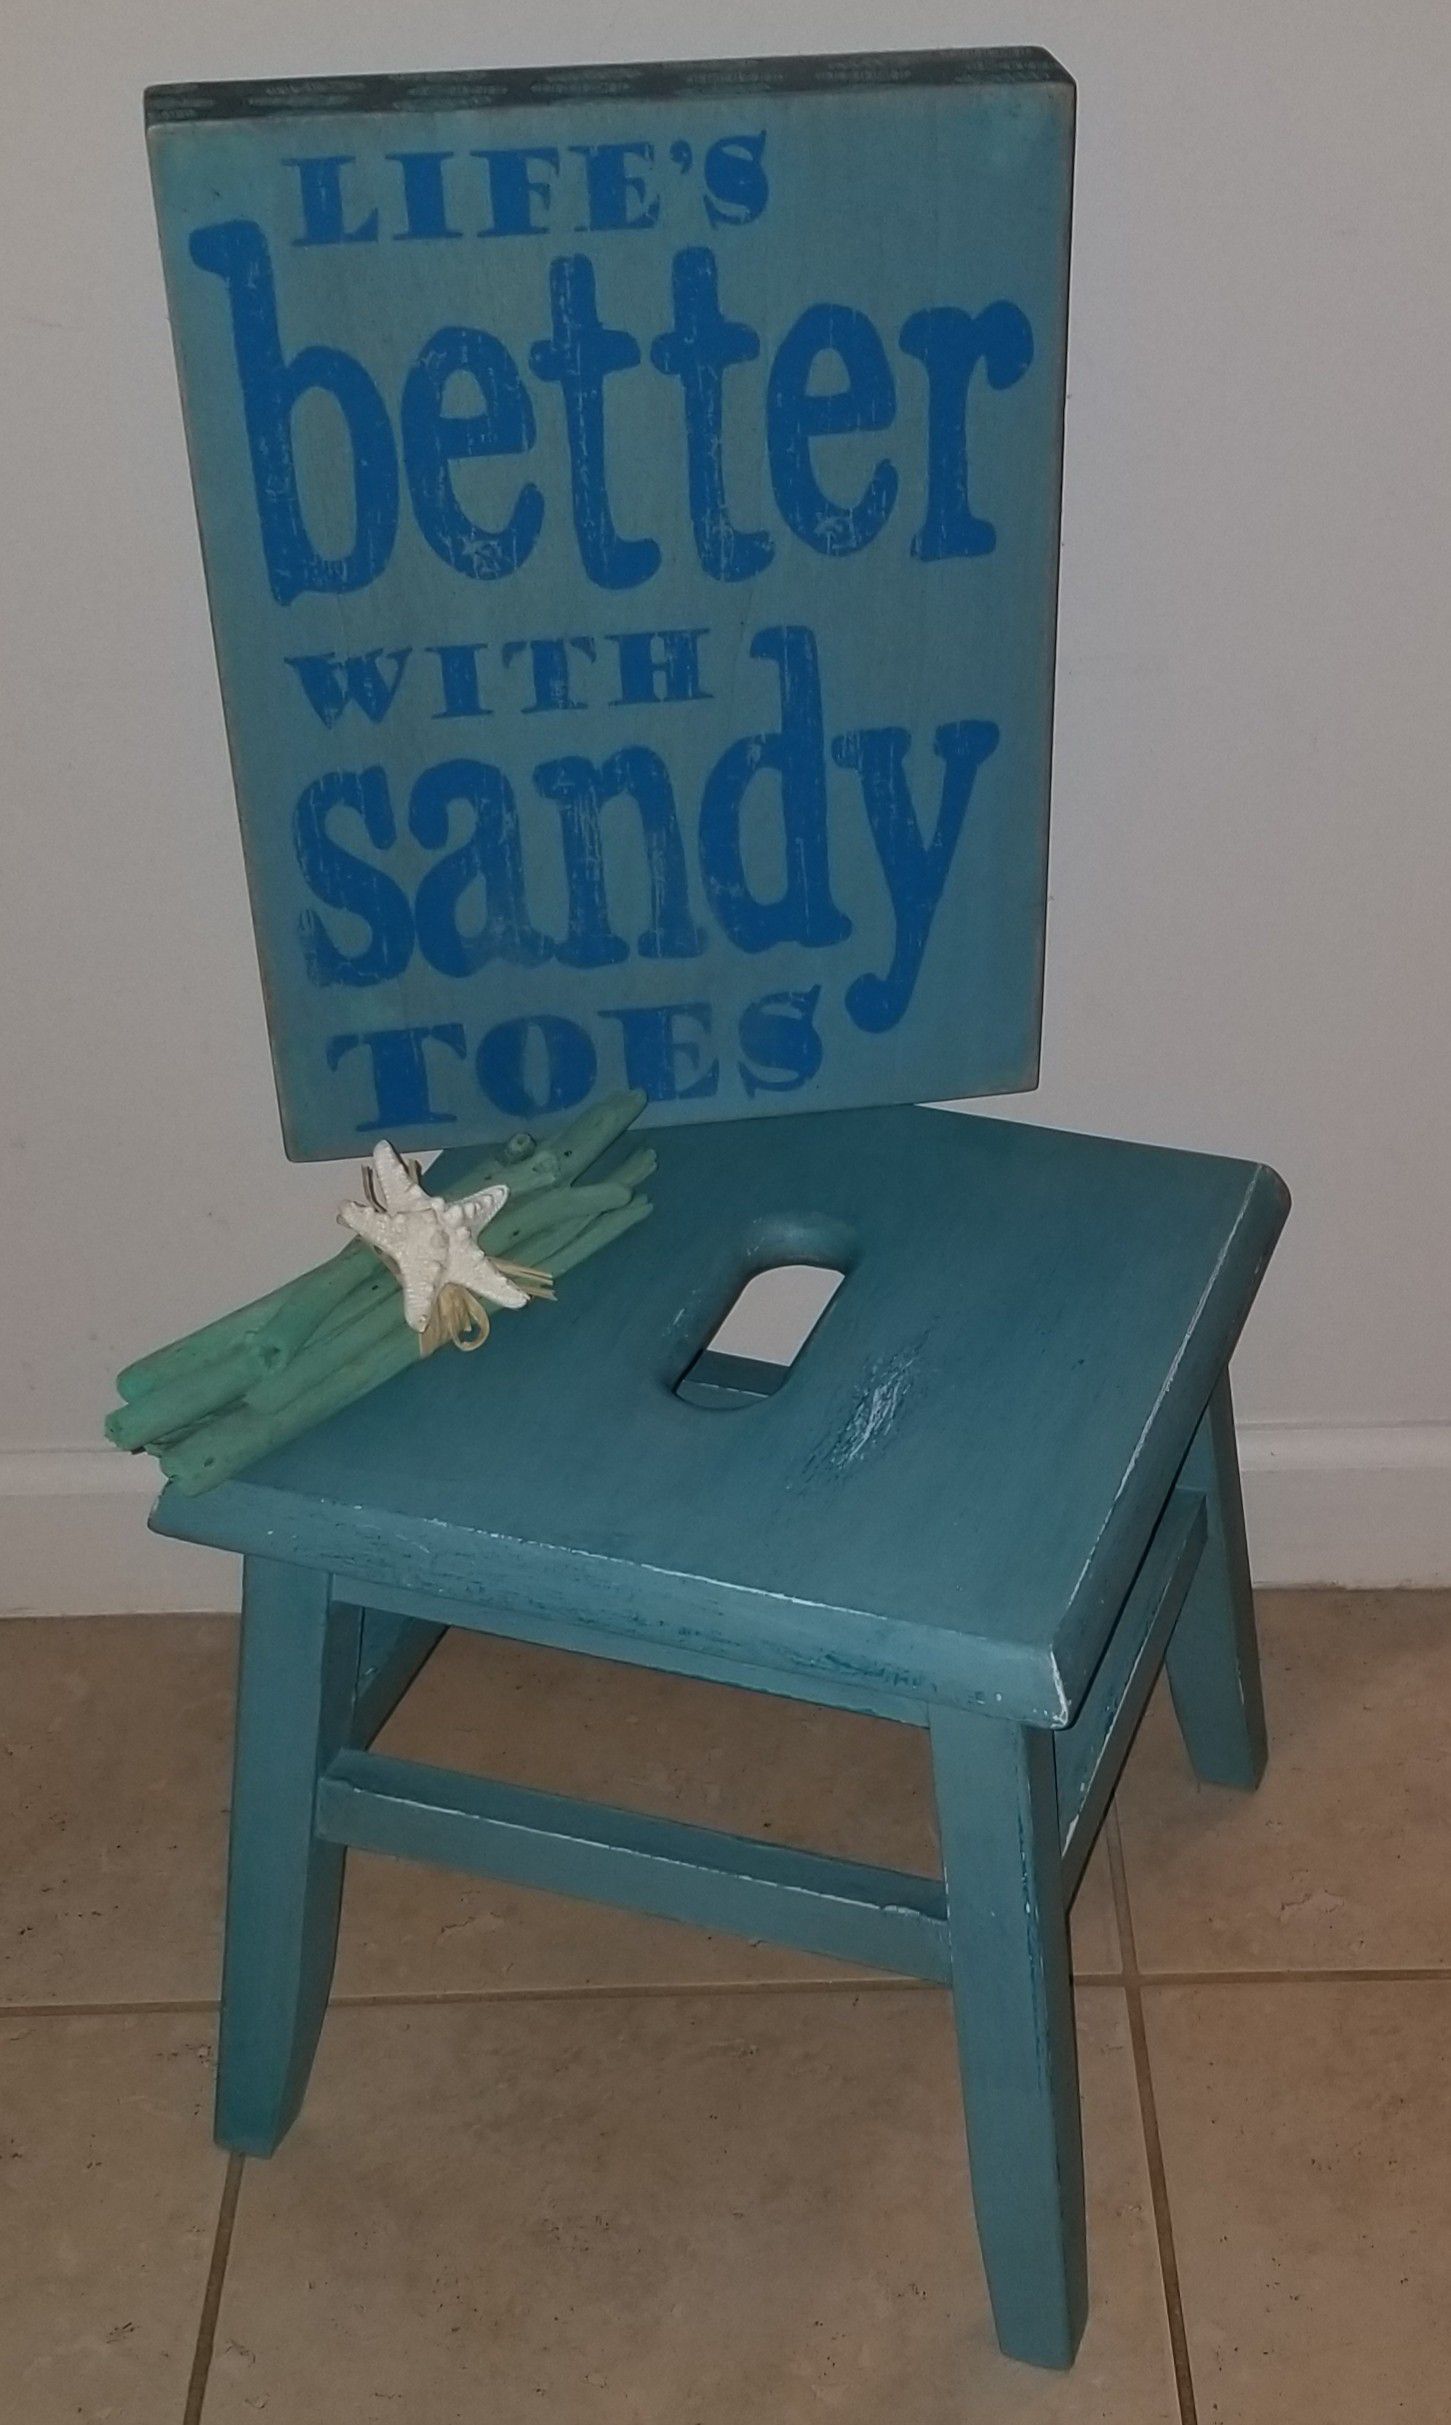 Step stool refinished, beach sign and decor